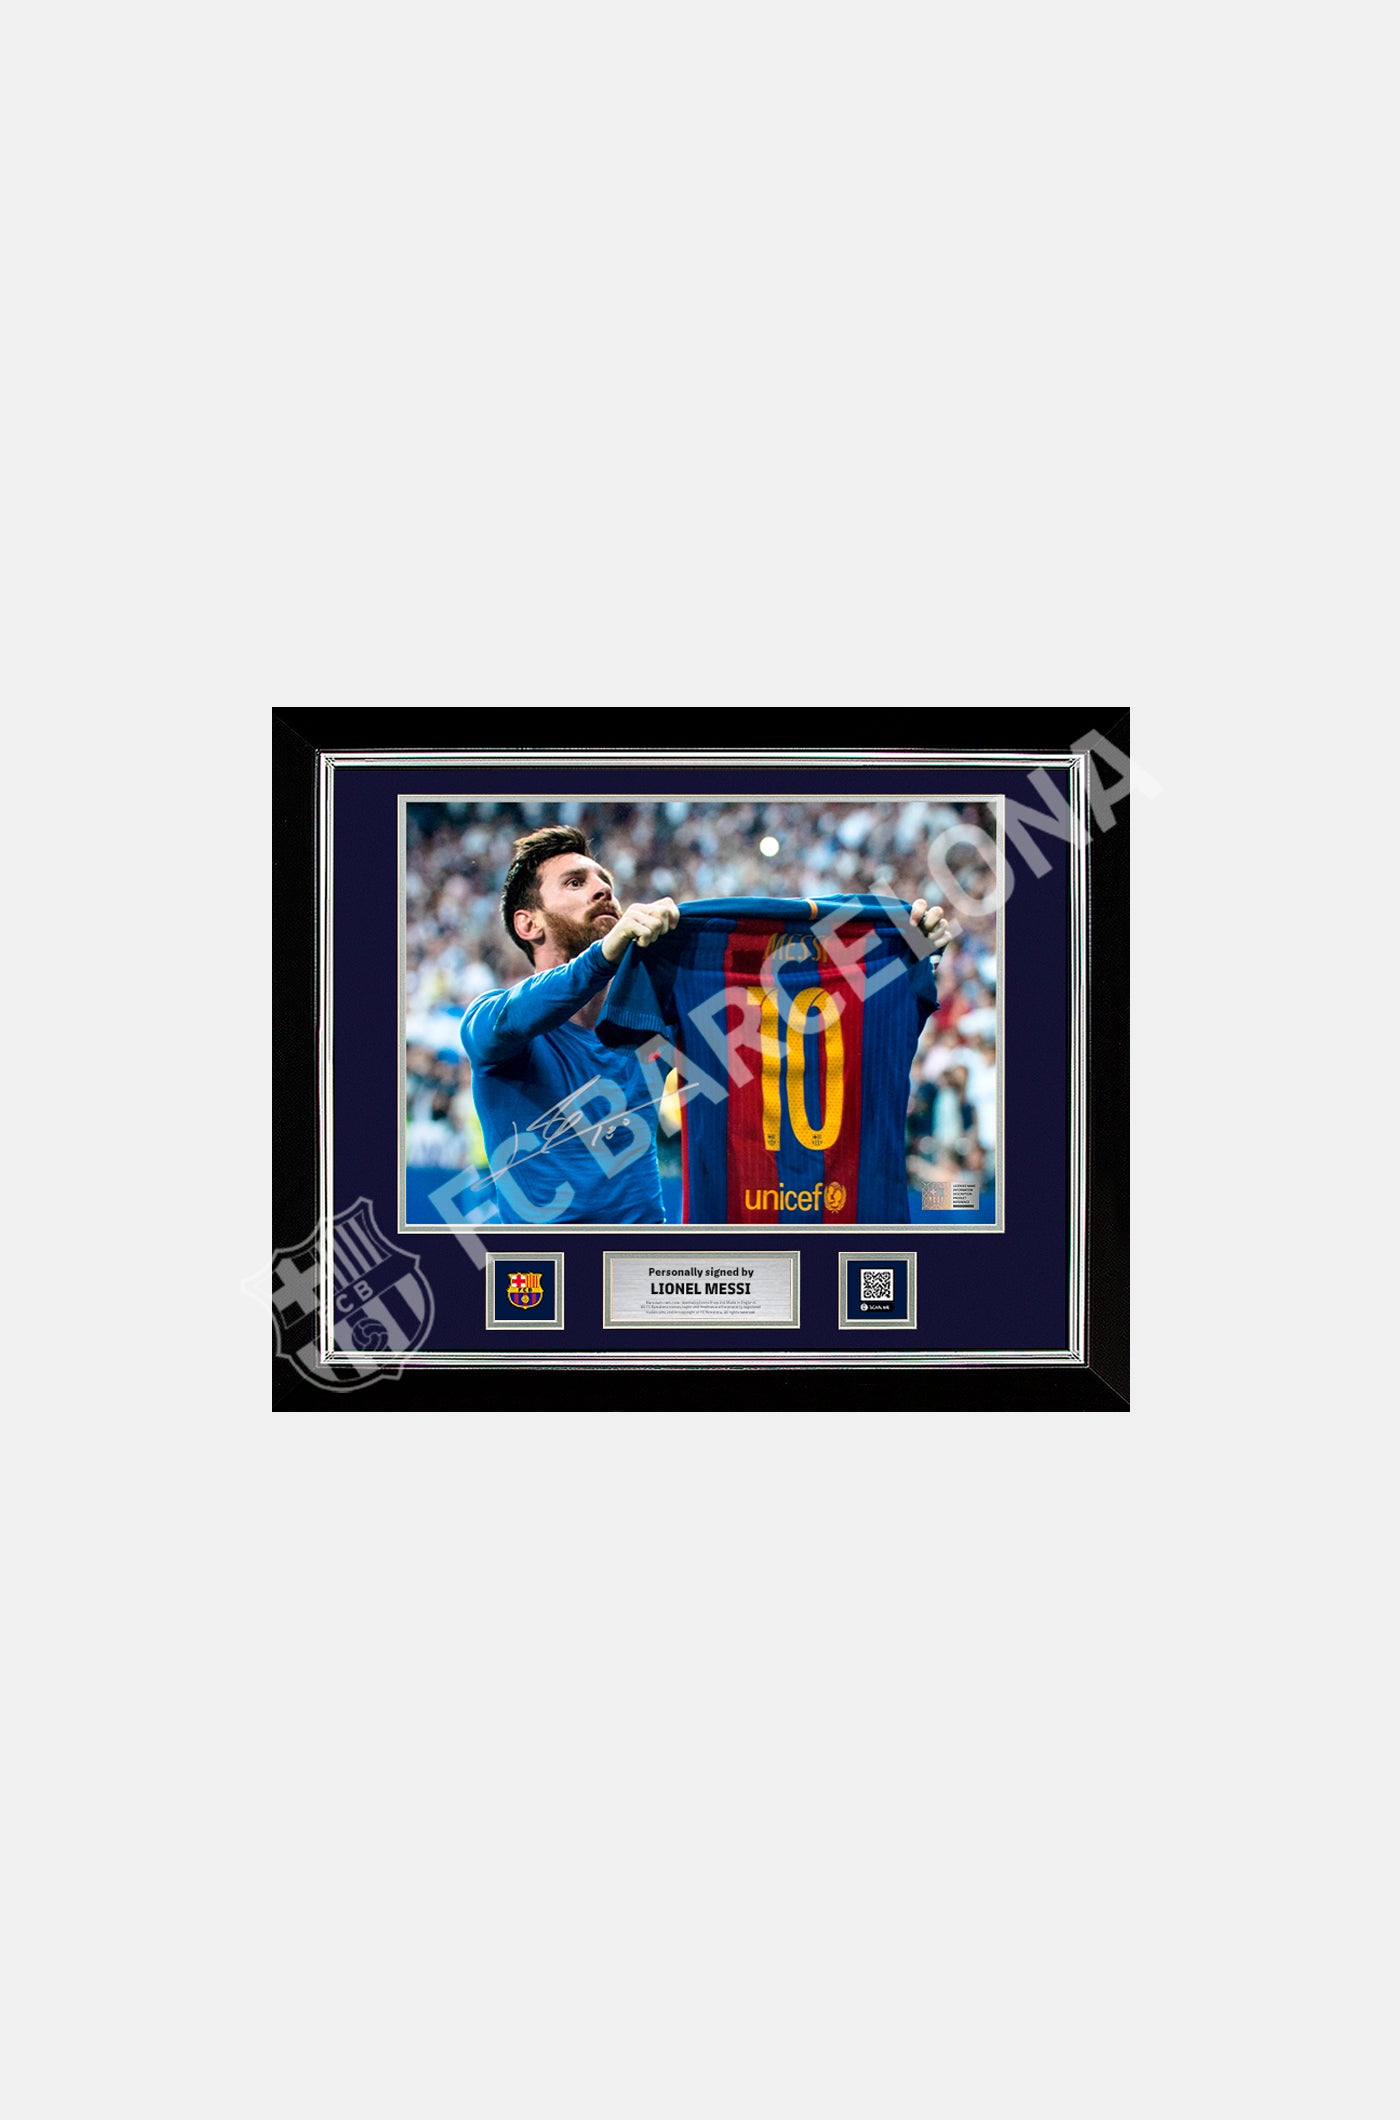 MESSI | Lionel Messi Official FC Barcelona Signed and Framed Photo: Iconic Clasico Celebration